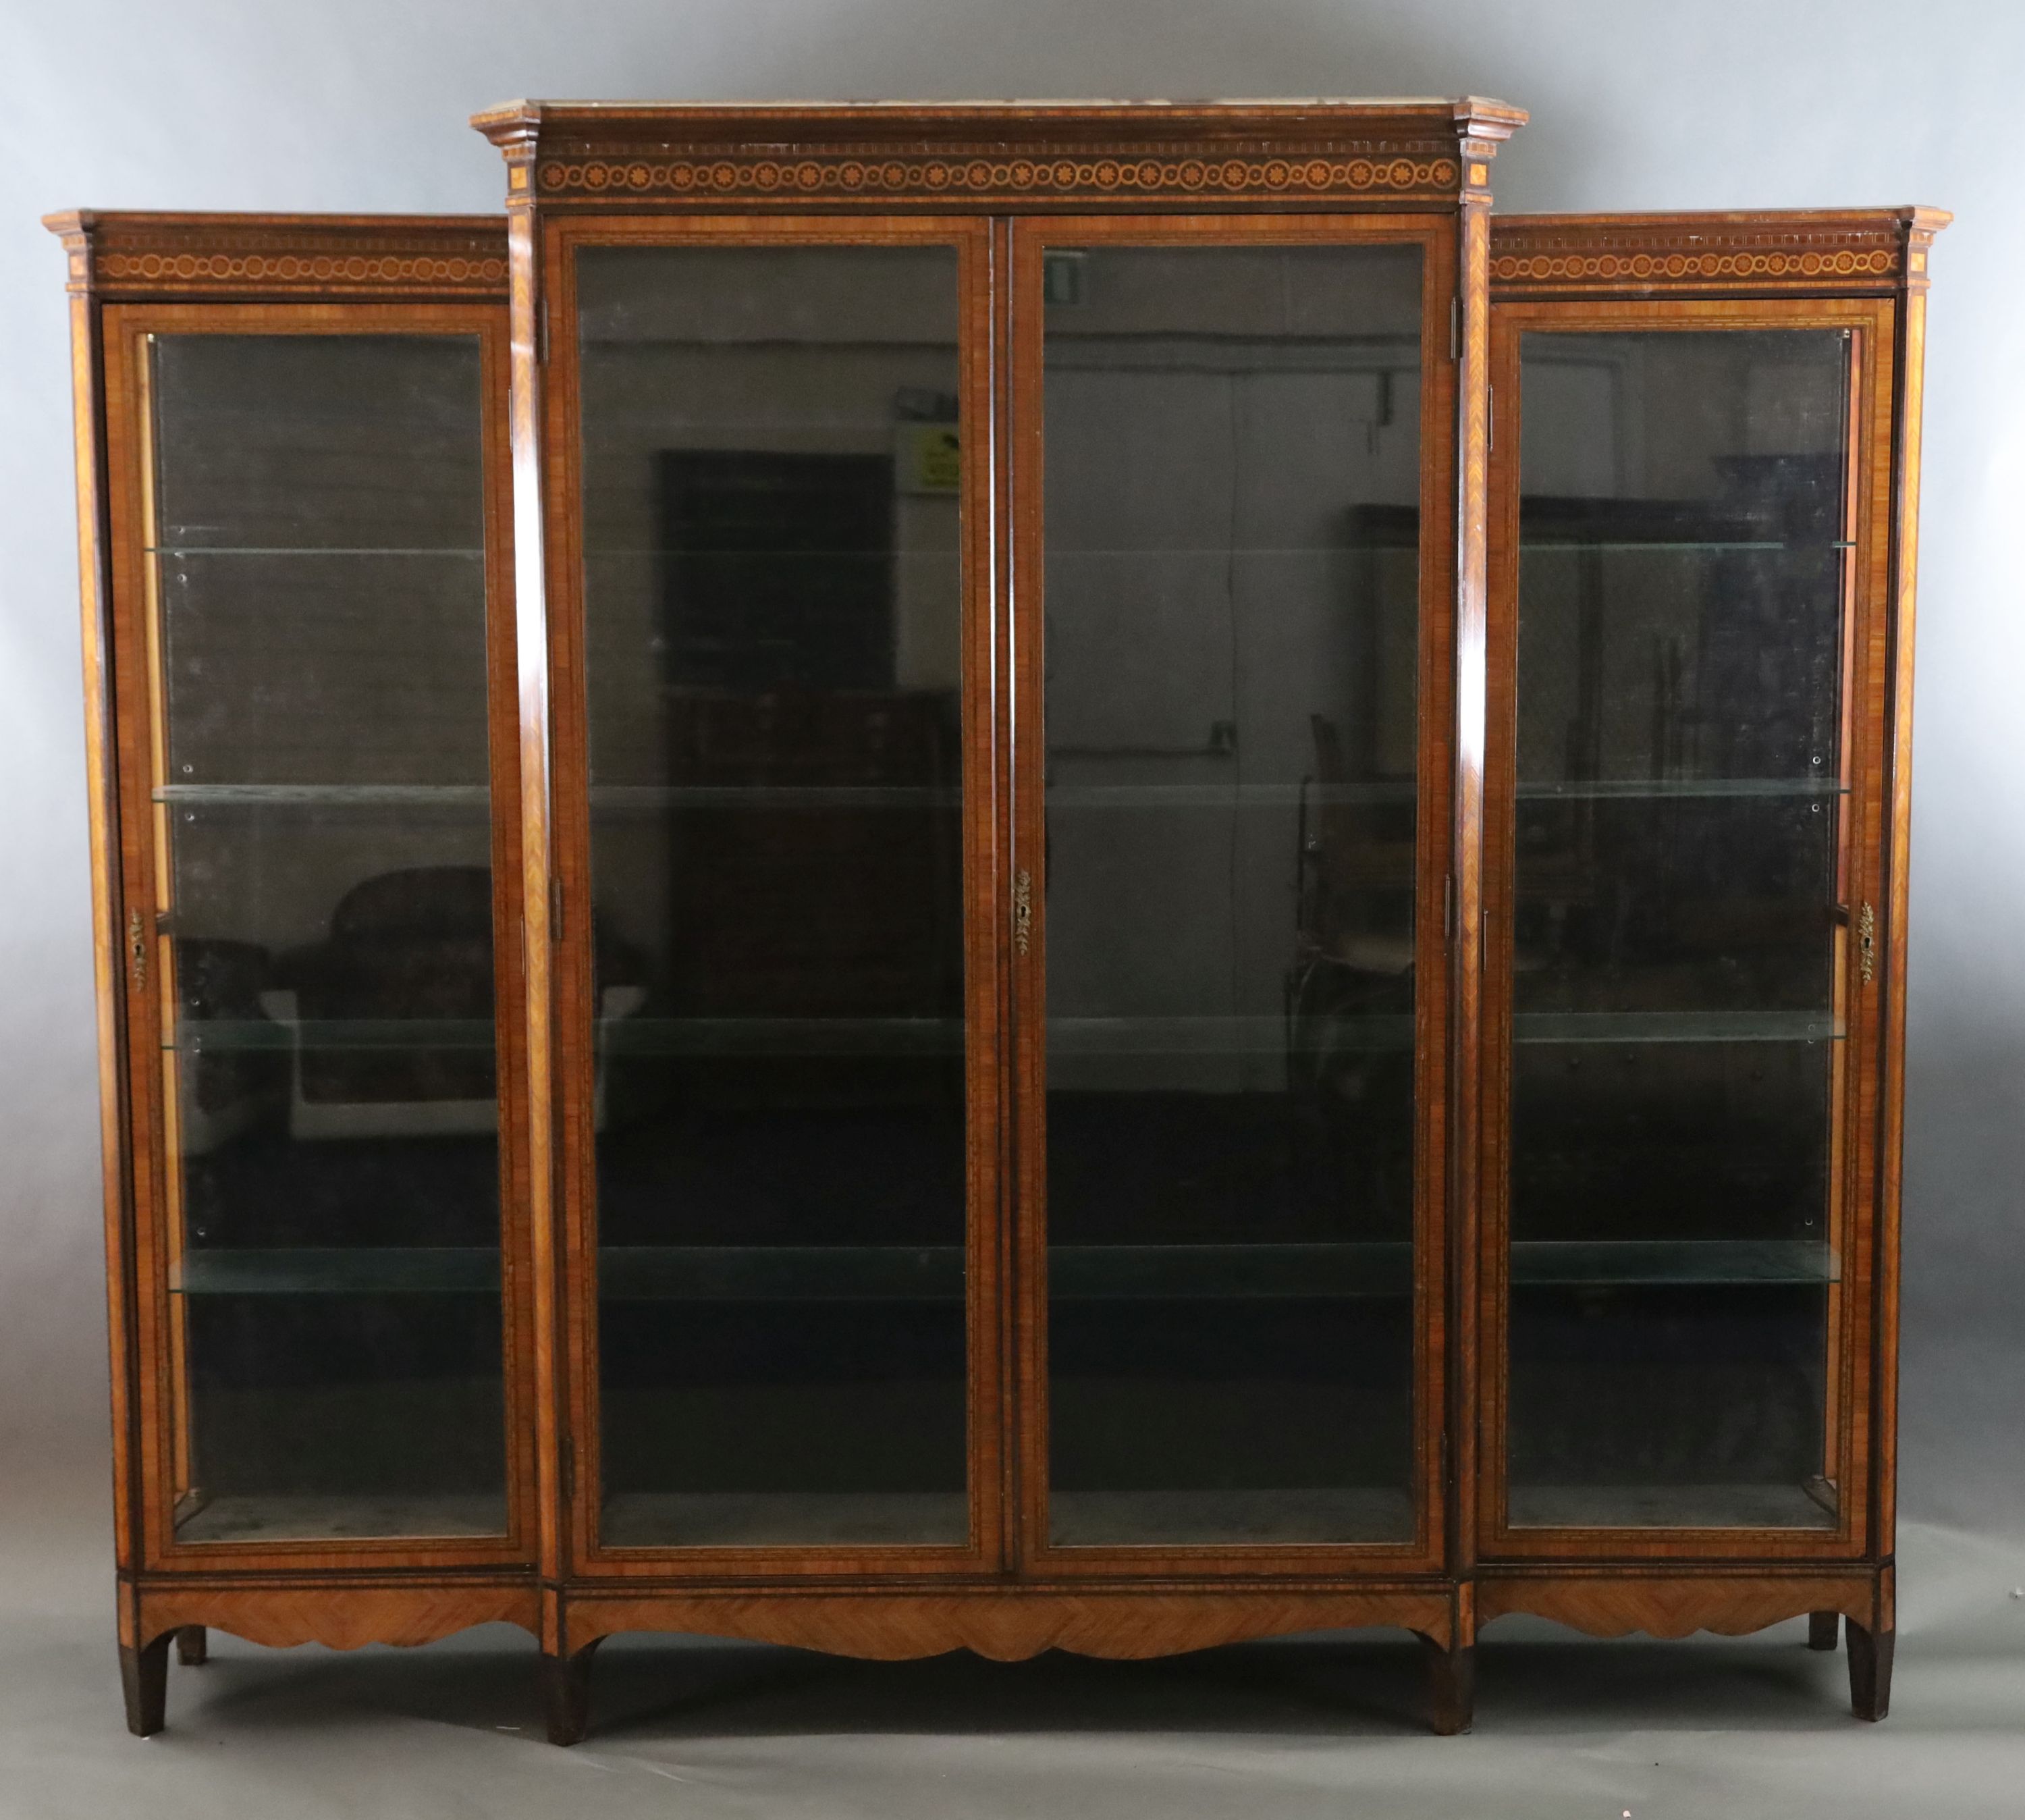 A 19th century French Louis Philippe period kingwood and marquetry vitrine, W.8ft 4in. D.1ft 5in. H.7ft 4in.